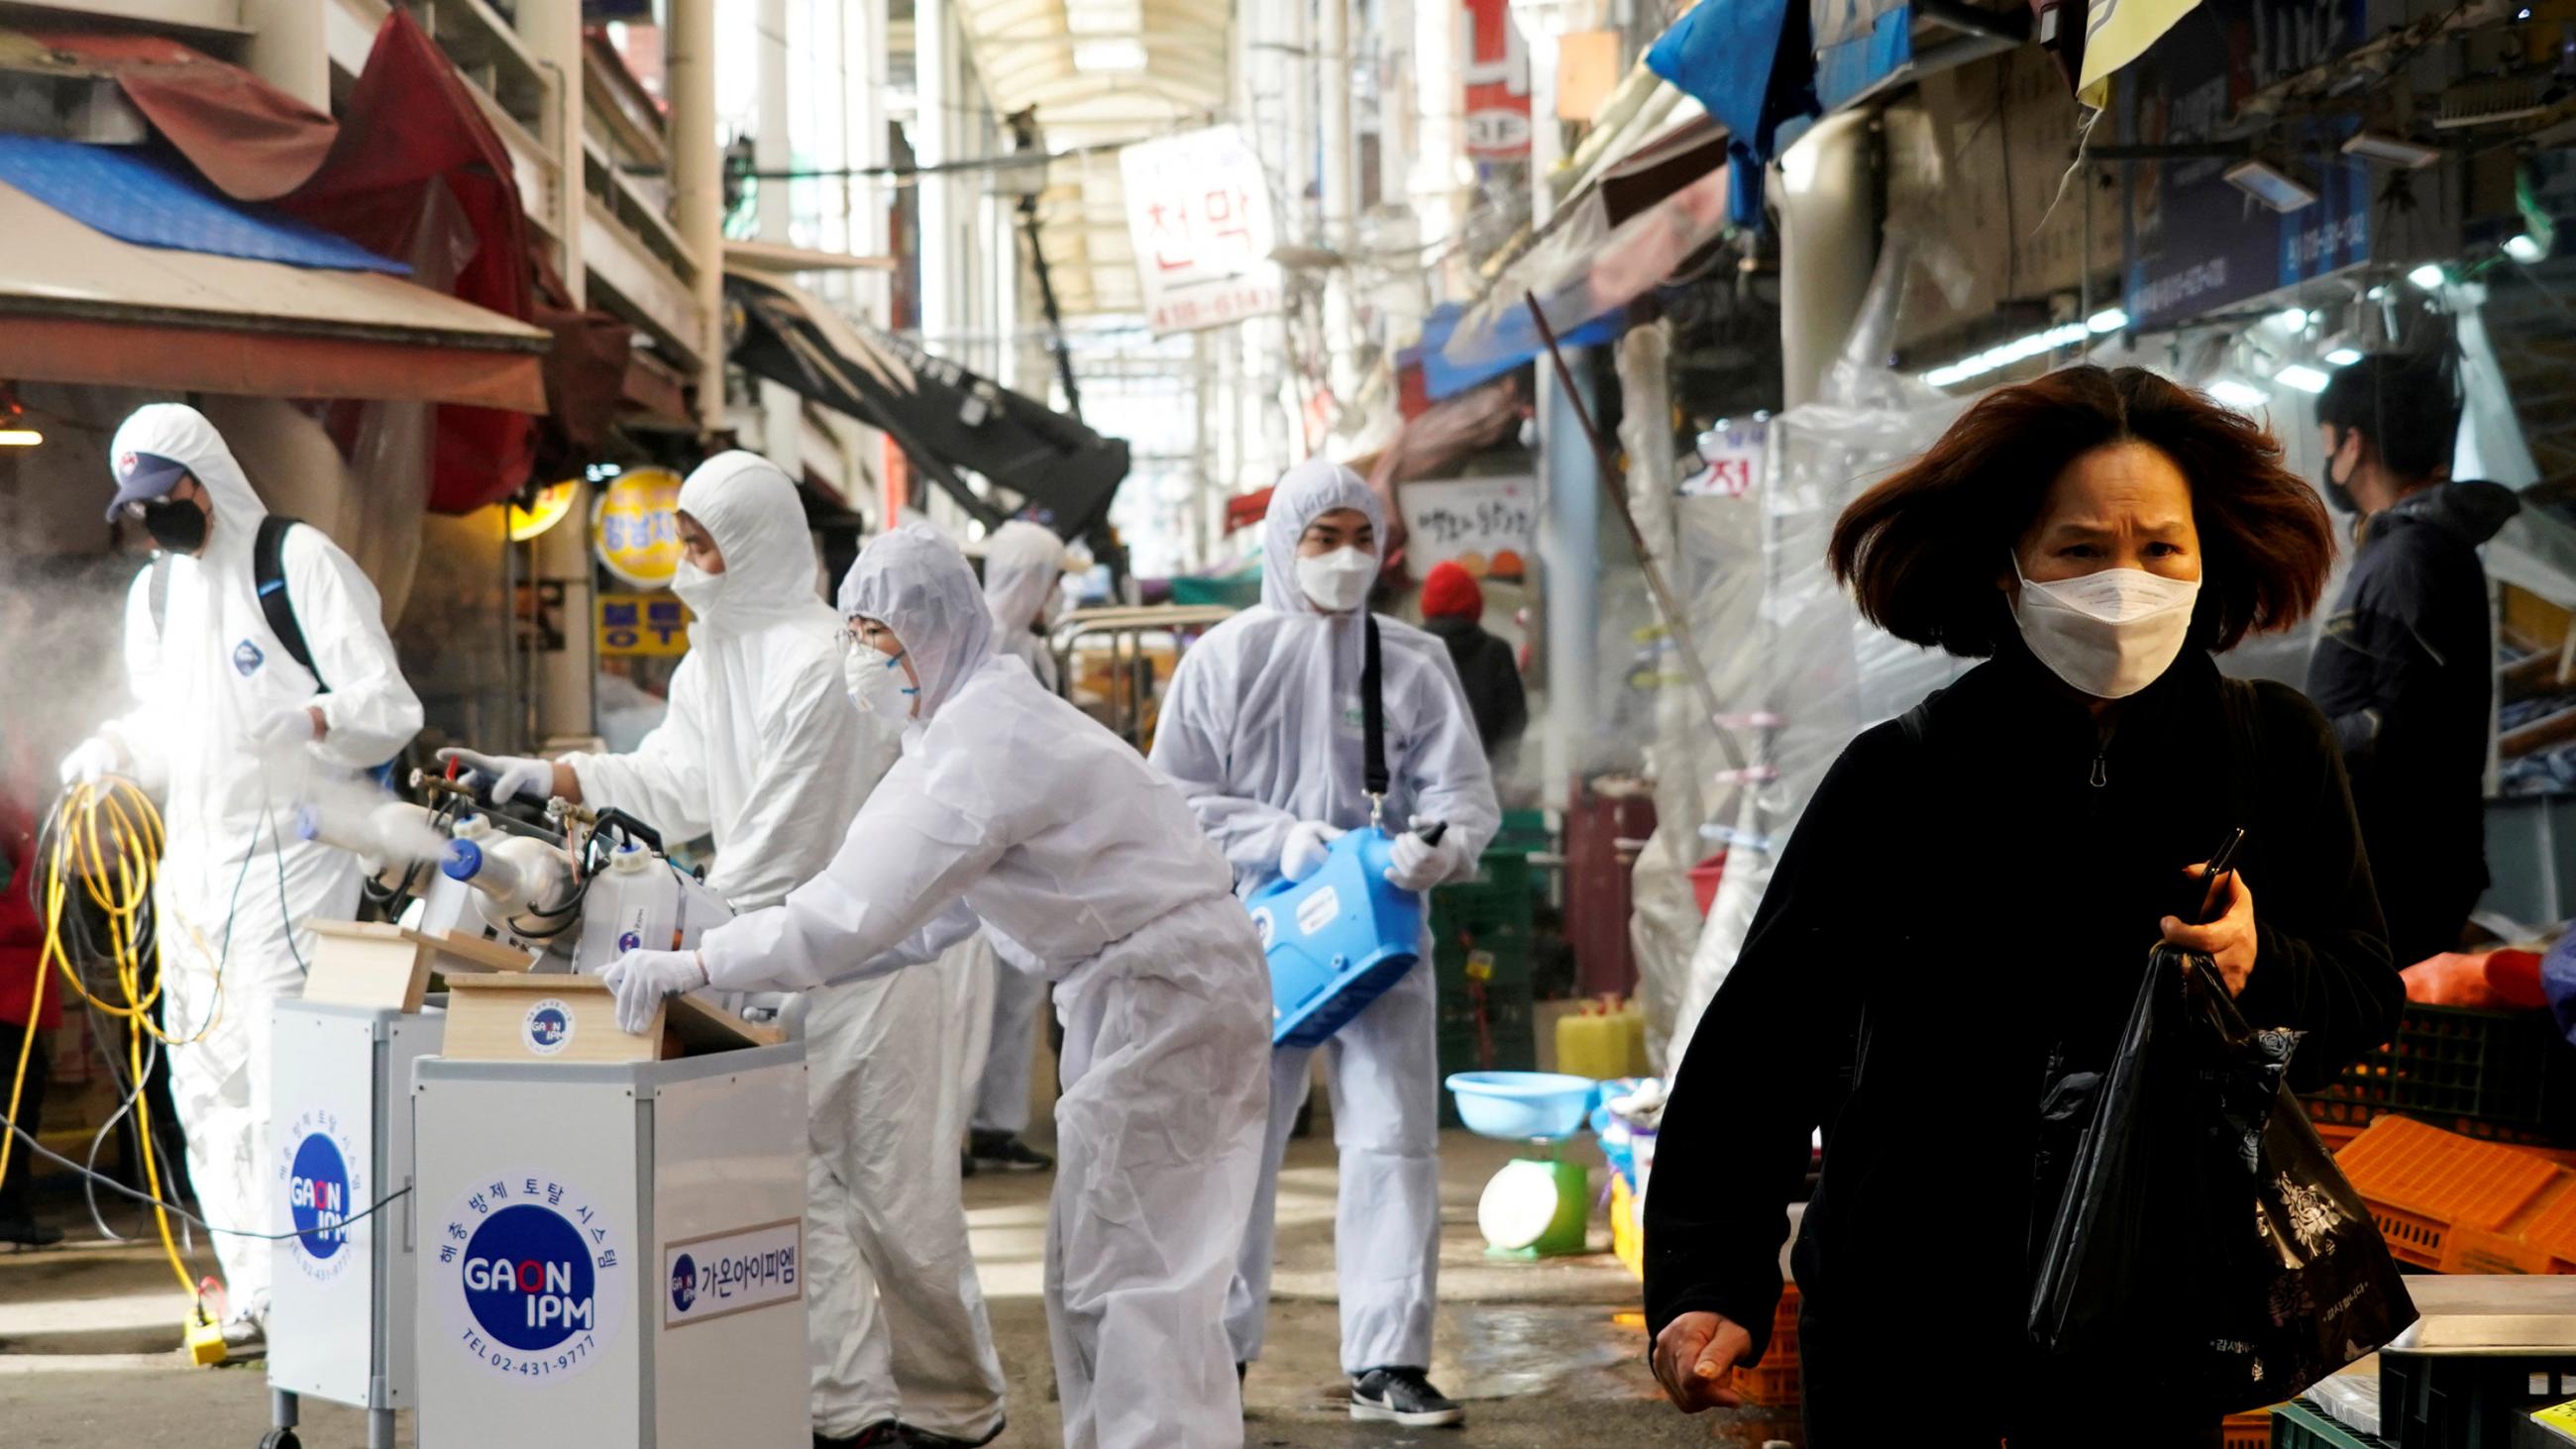 This is a striking image with a woman walking by a crew covered in protective gear spraying a substance on the streets of what looks like a normally busy market, now almost abandoned. 